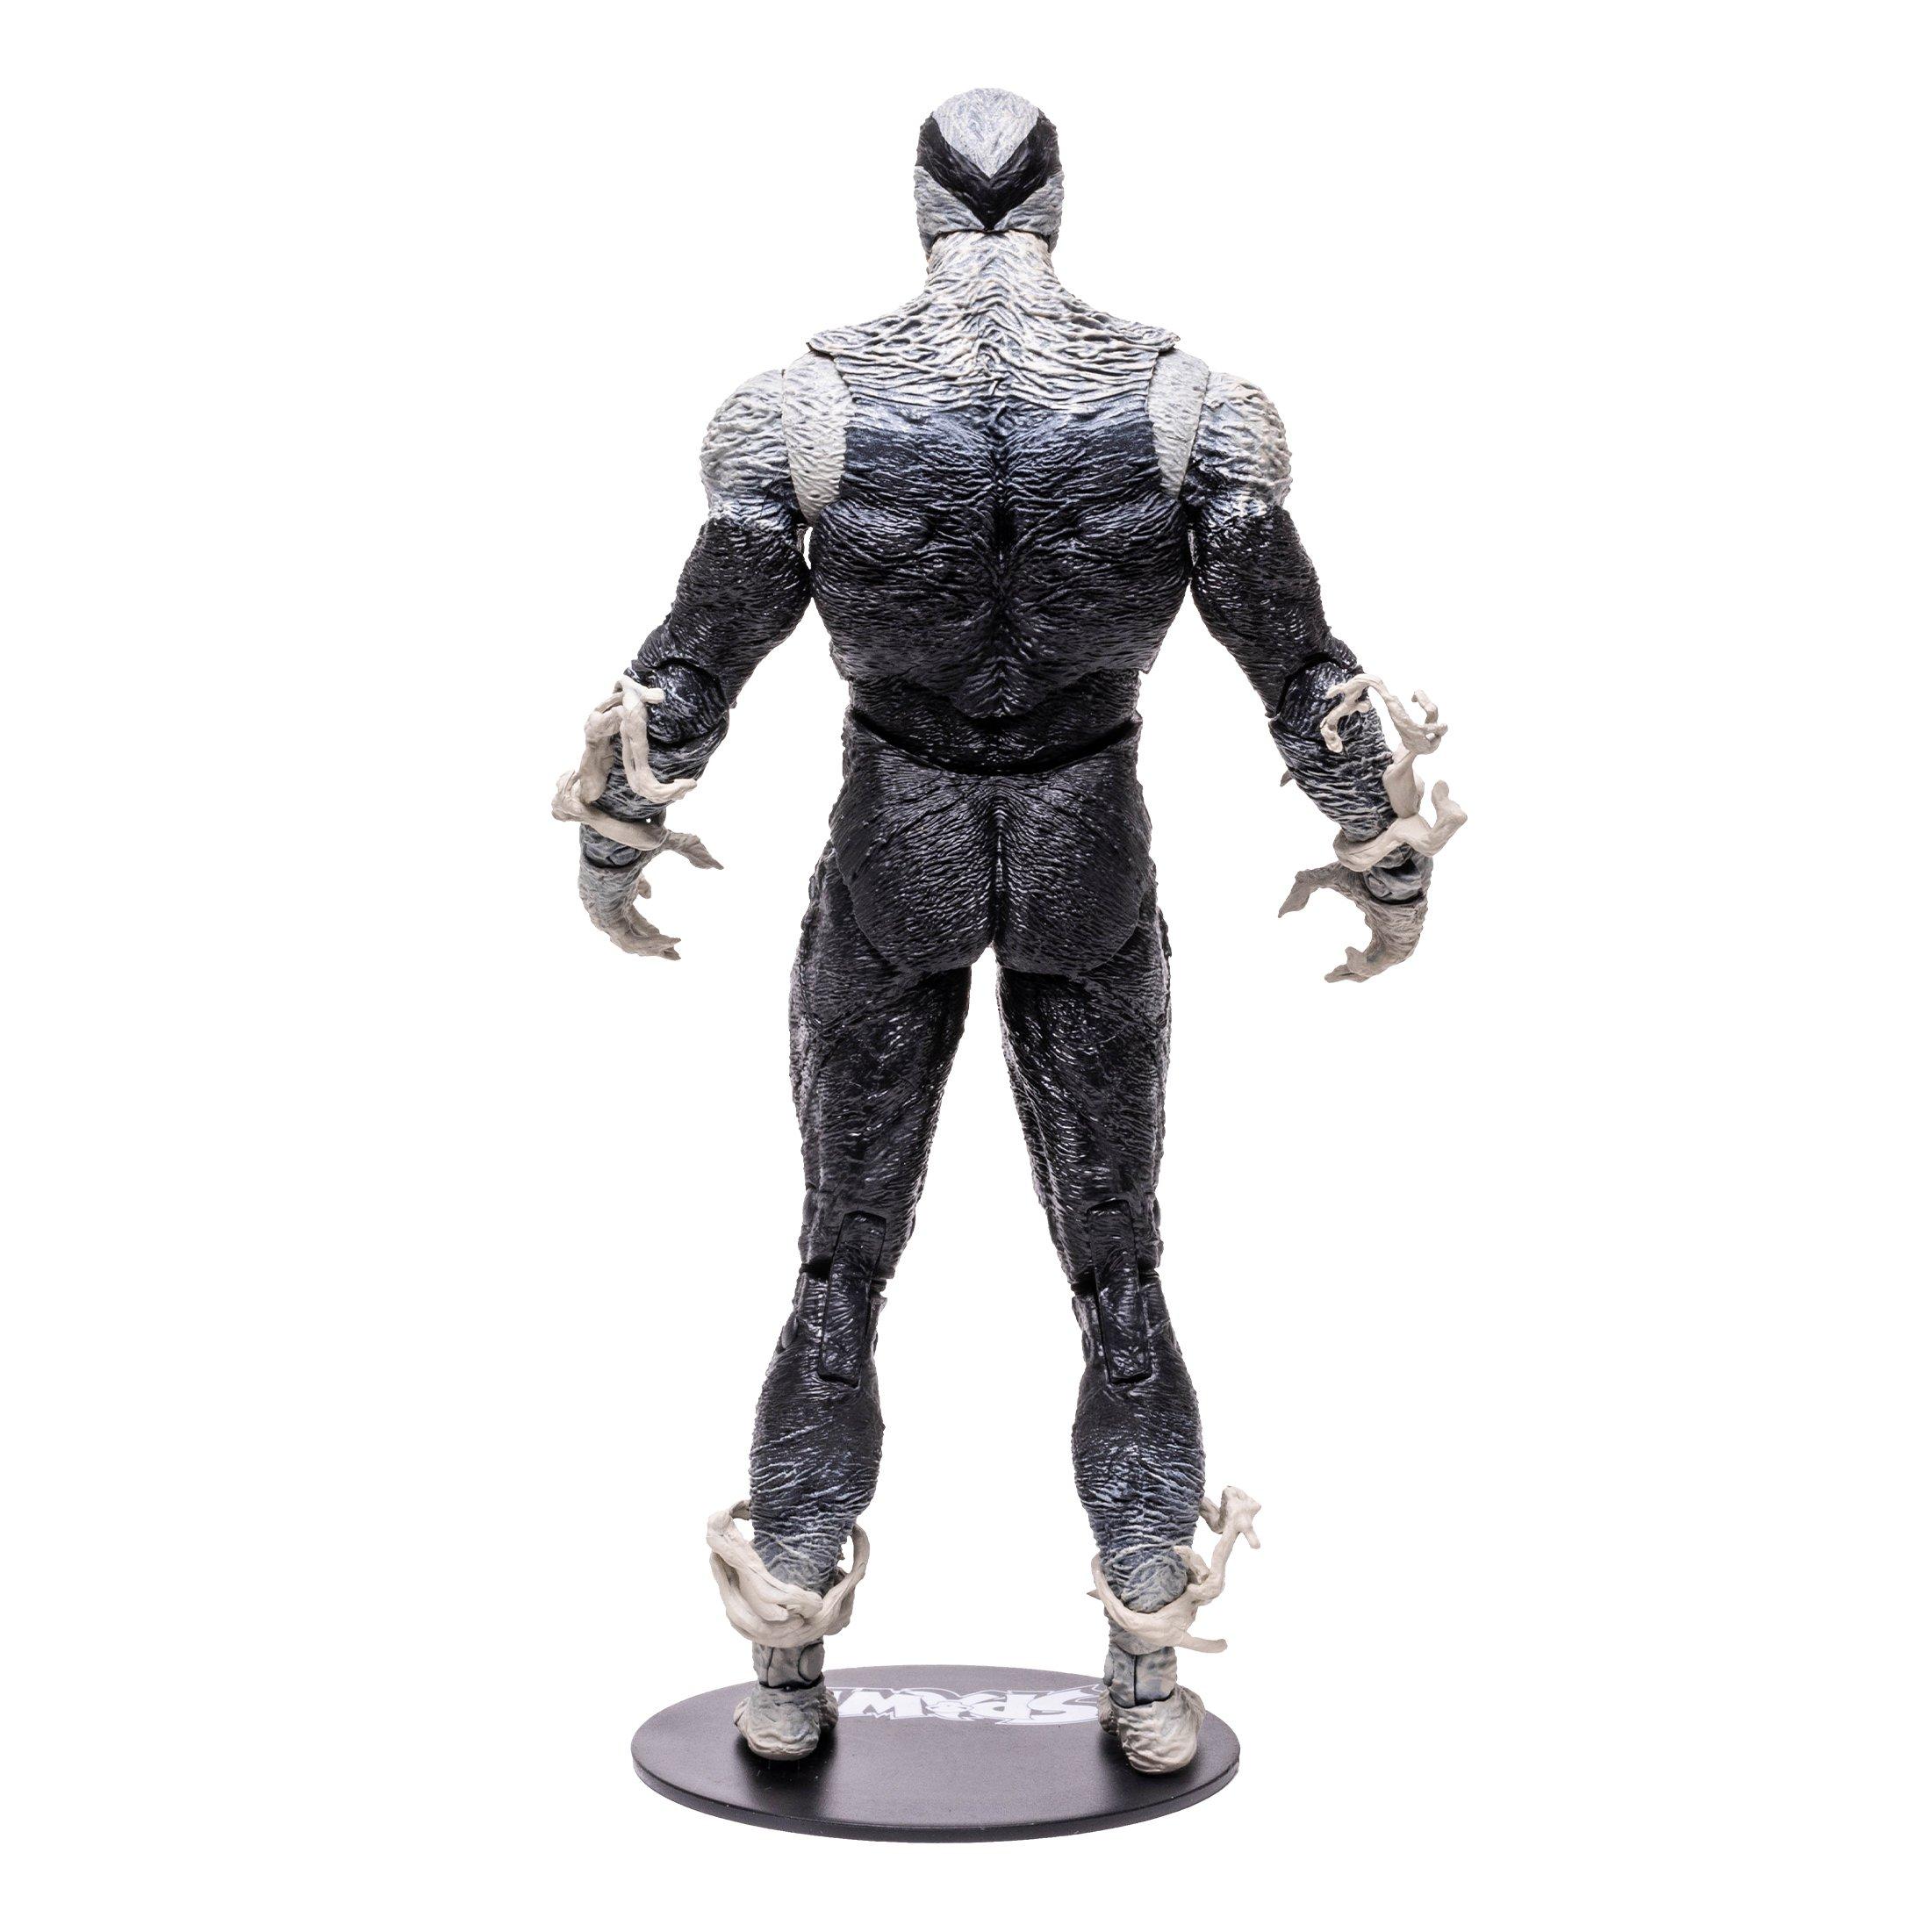 McFarlane Toys movie, television, and video game action figures review